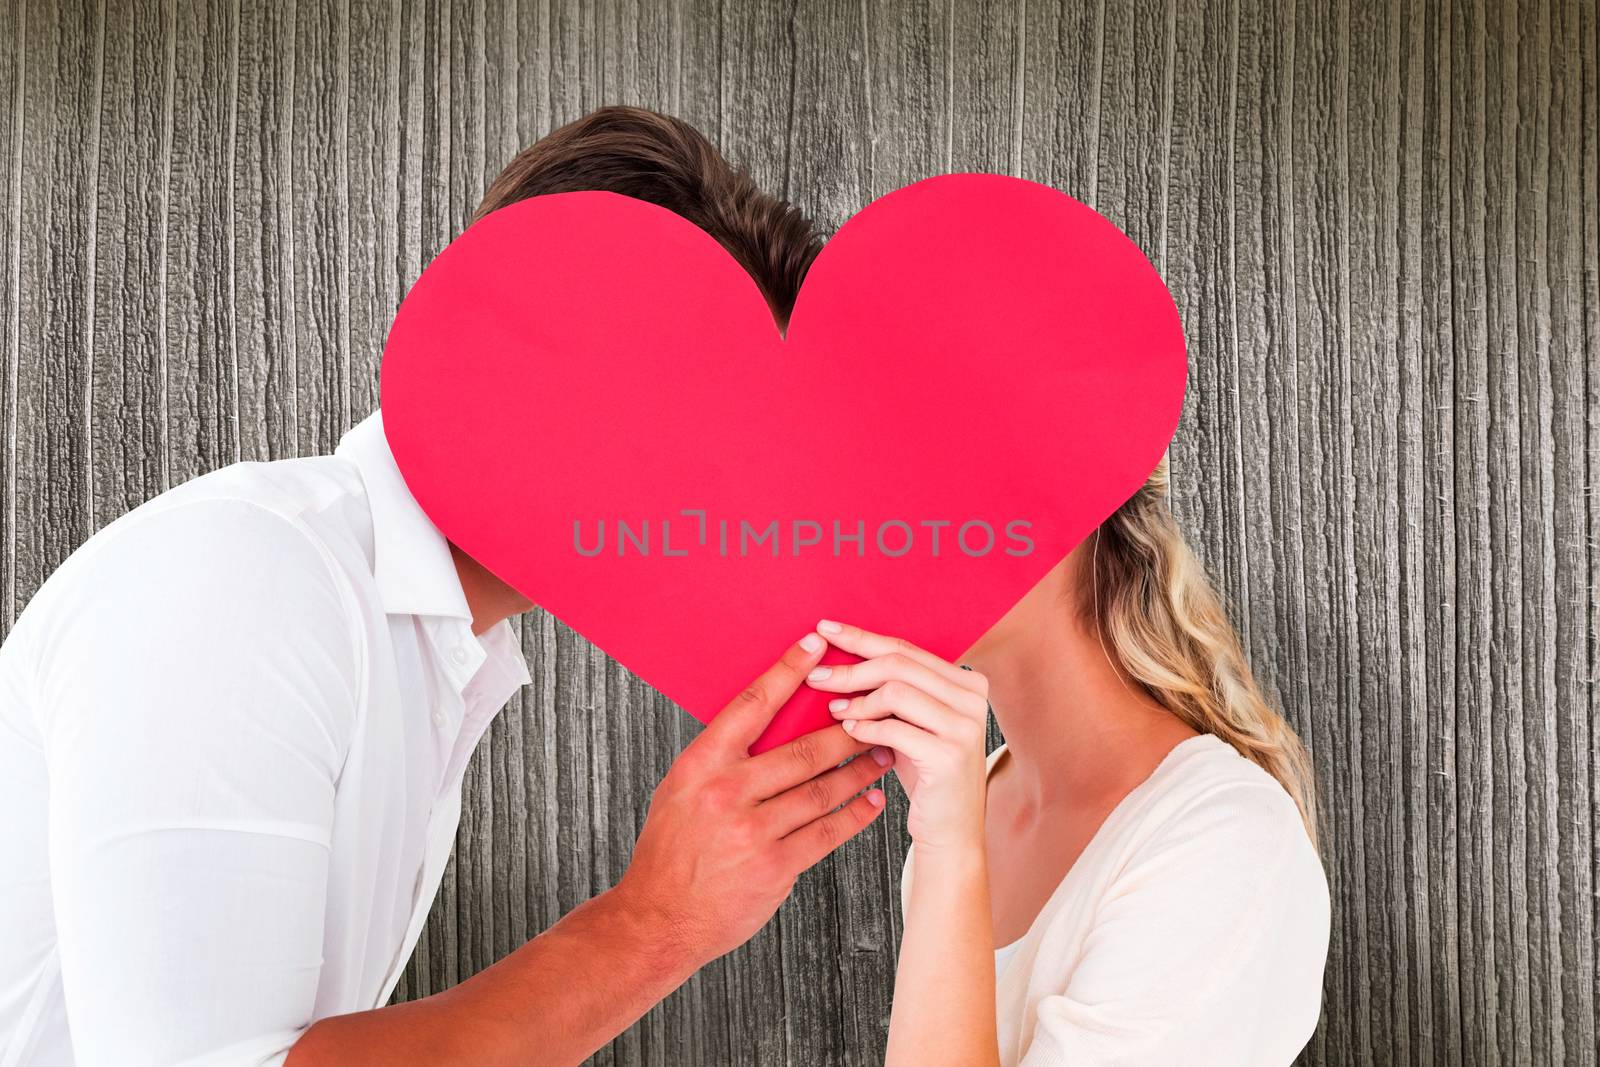 Attractive young couple kissing behind large heart against wooden planks